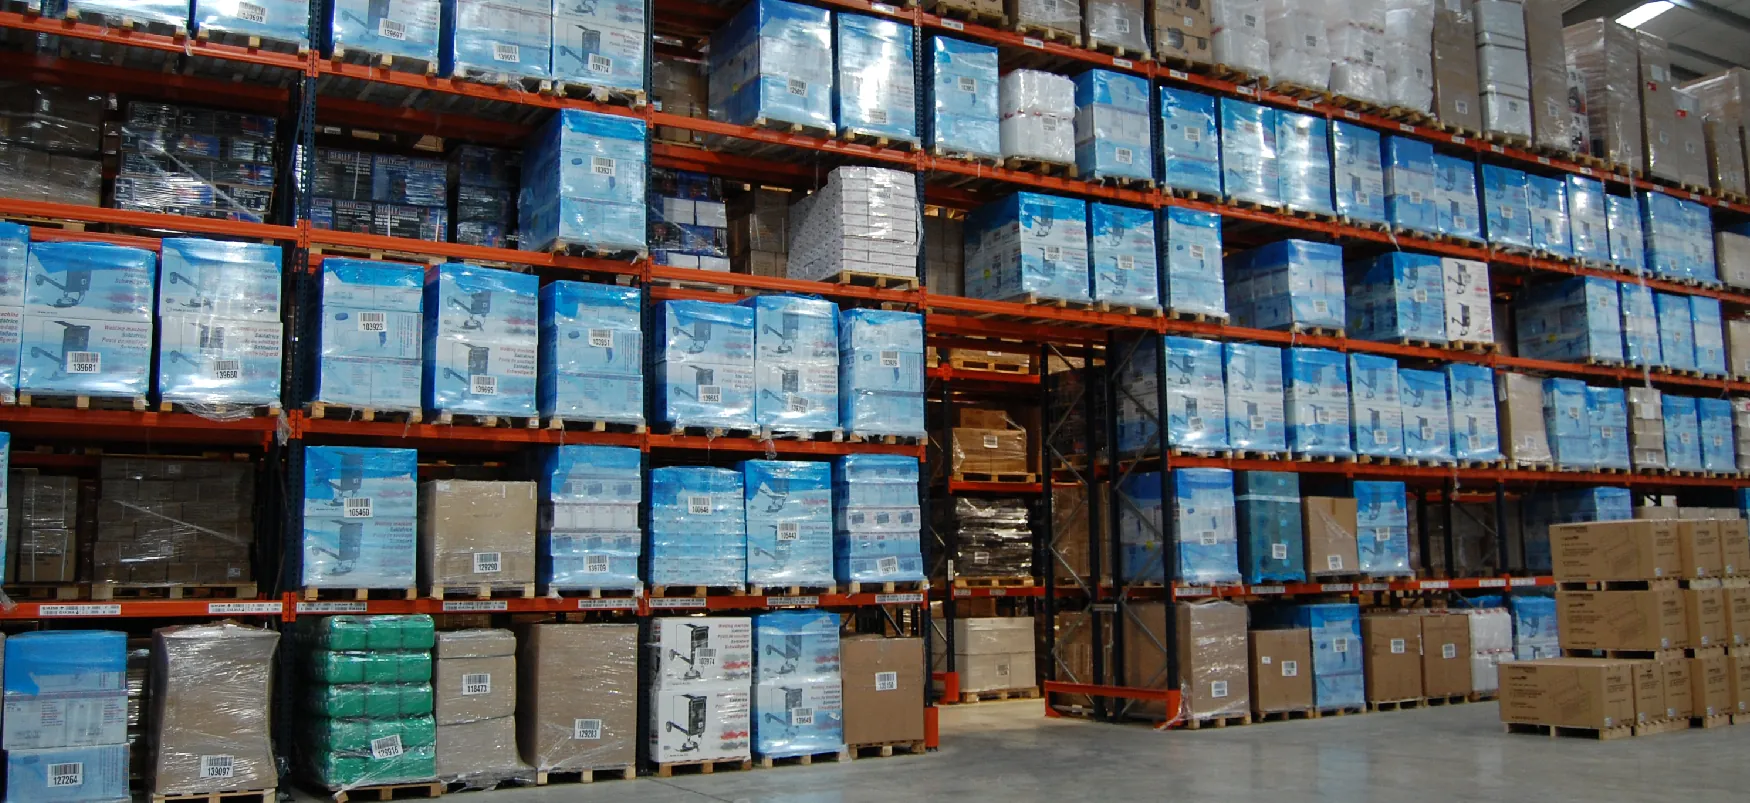 Sealey Power Products are stocked in the warehouse.